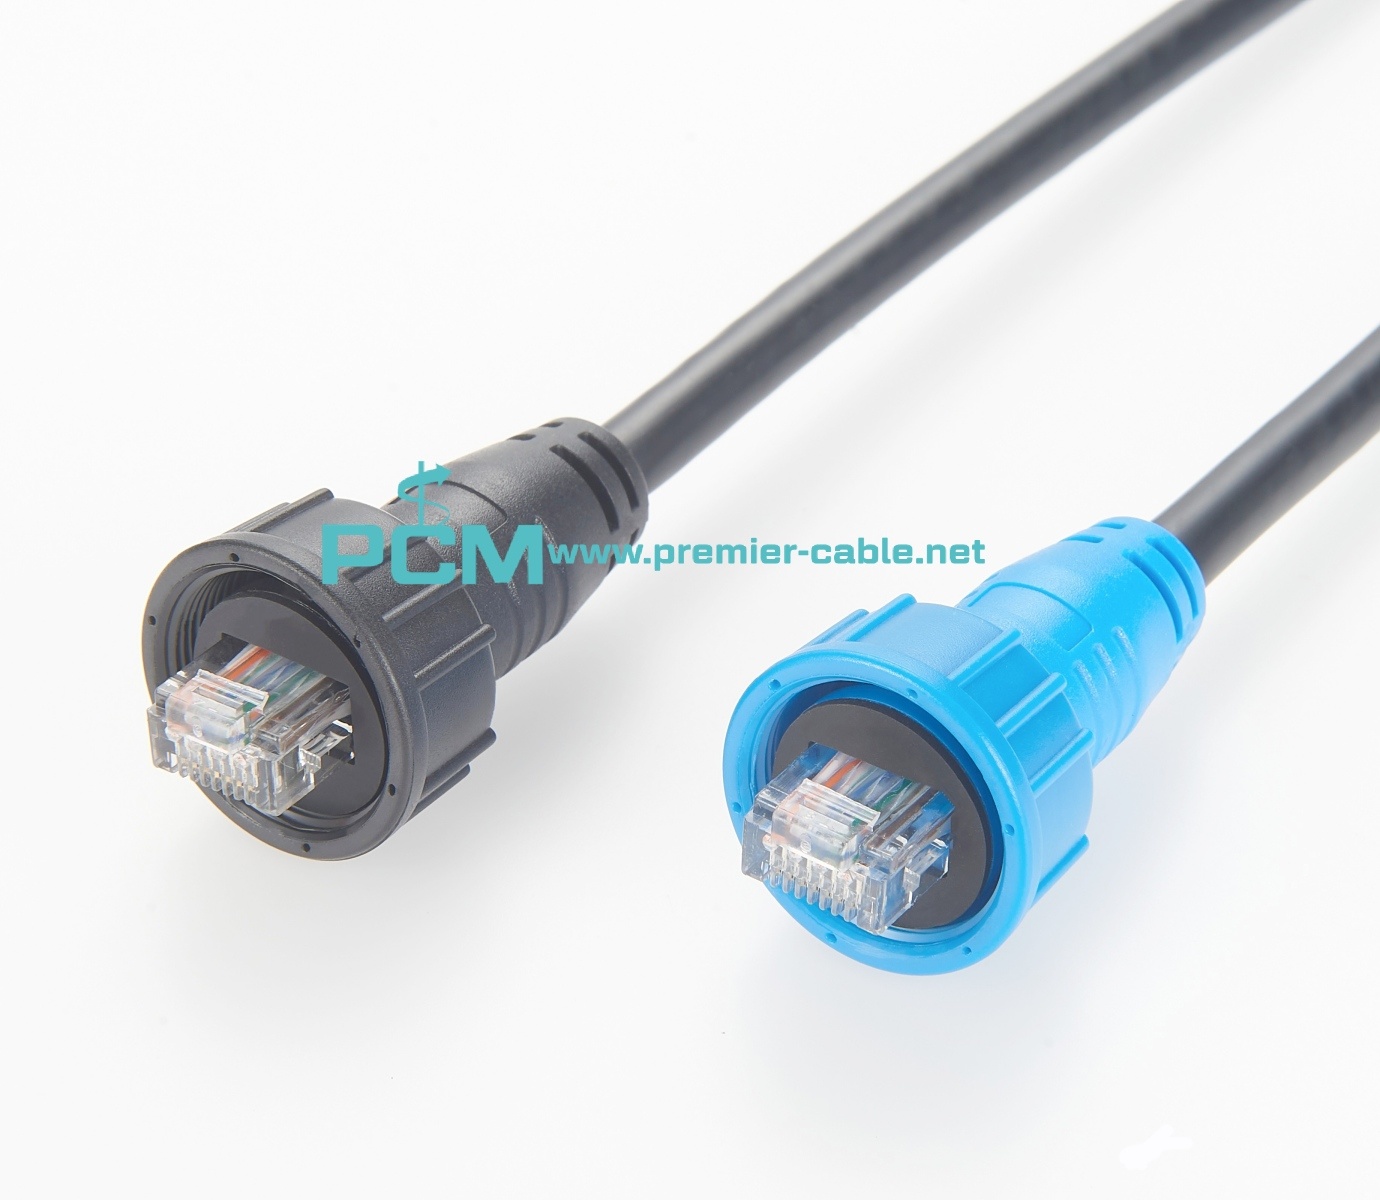 Premier Cable Shadow-Caster Garmin Ethernet marine network cable